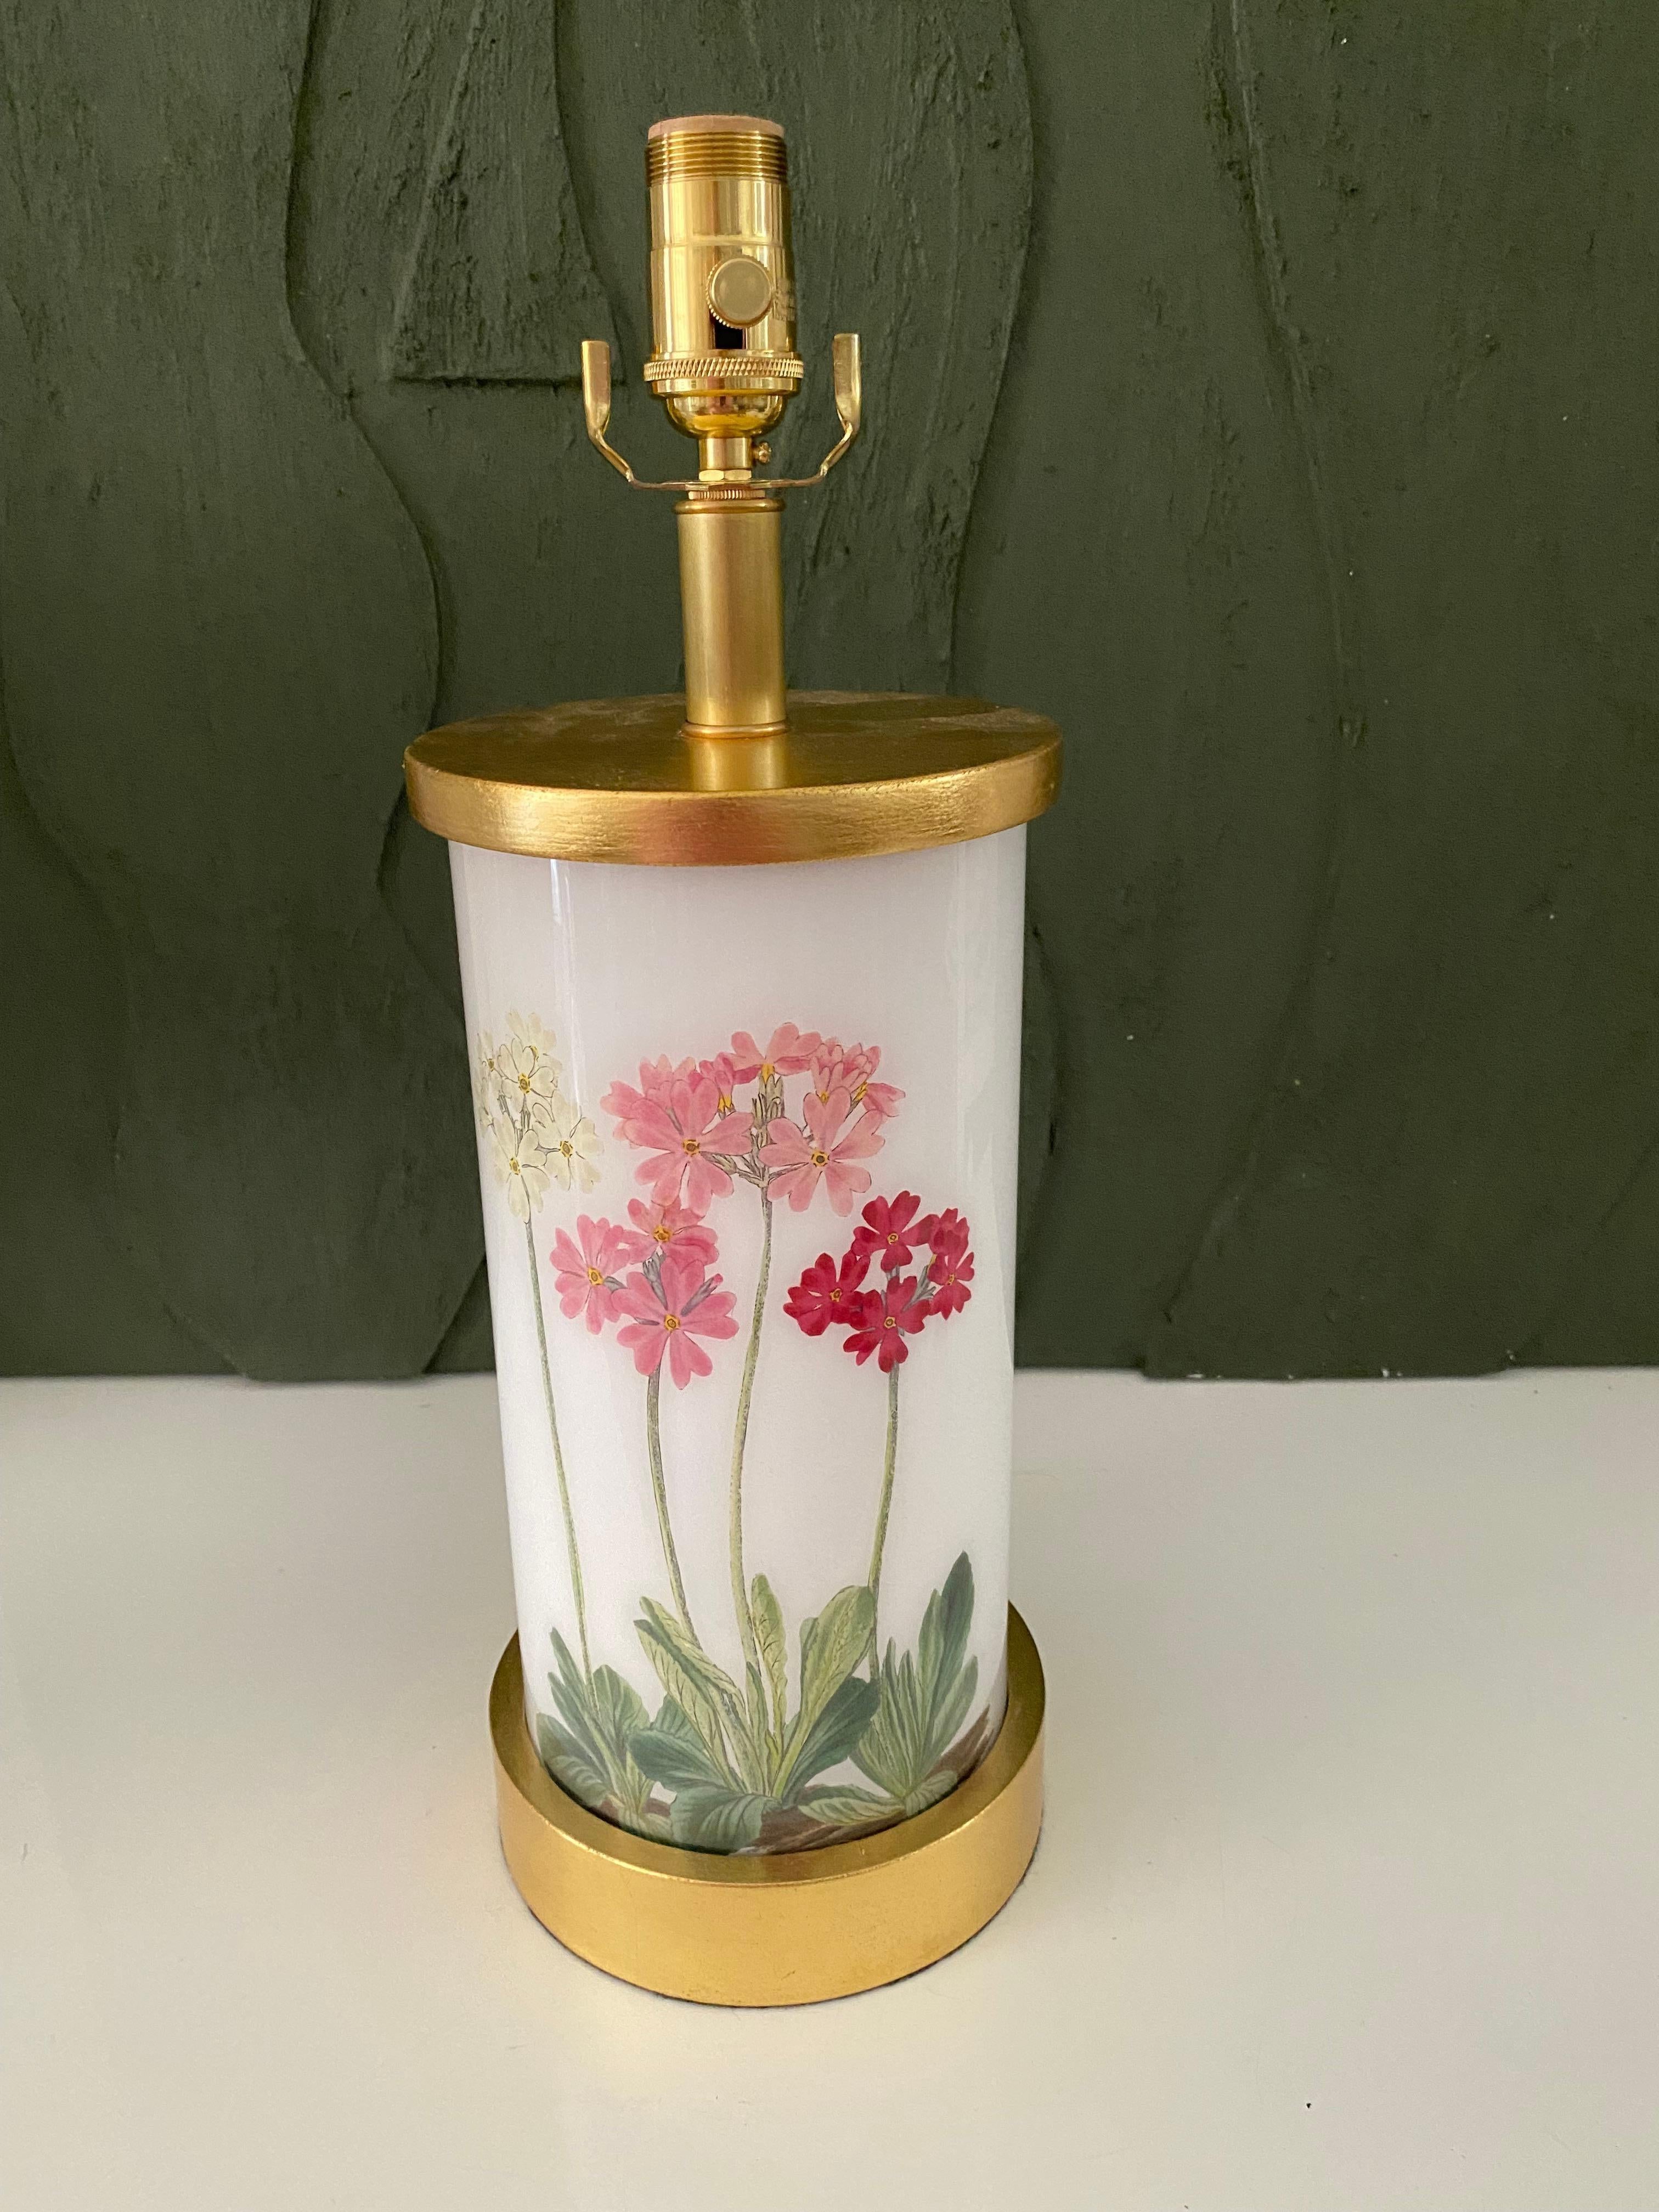 Hand made with care in Houston, Texas. This glass lamp features a selection of 19th century hand-colored engravings of beautiful primulas in pink and red hues against a soft white background, with hand-turned gilt wood base and cap, polished brass